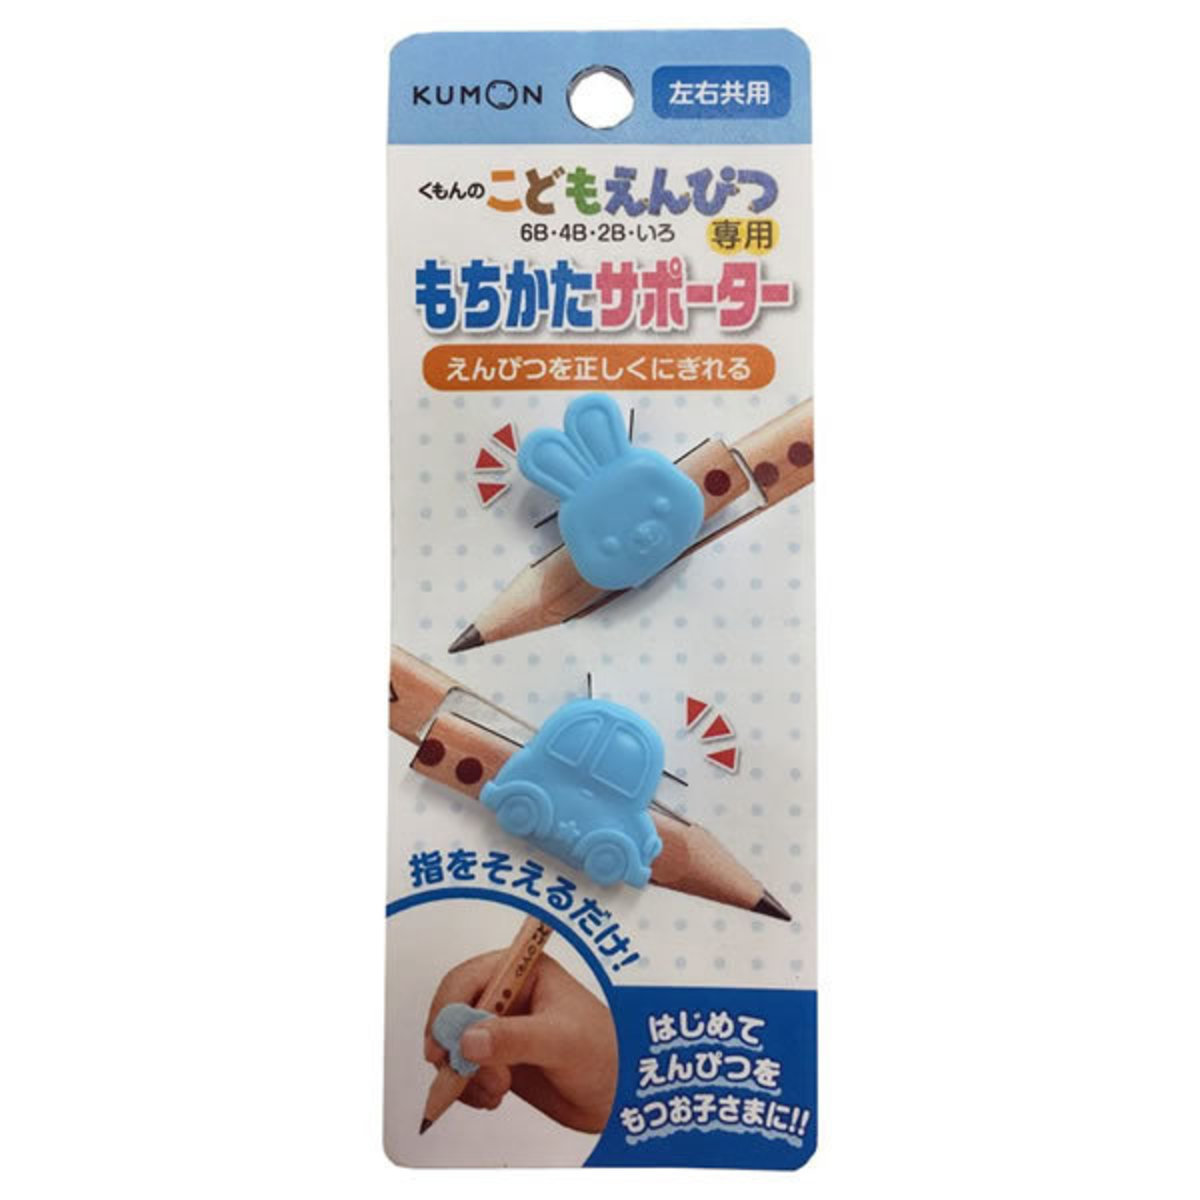 【ES-10】Kids writing Supporter For Kumon Pen (4944121533909)(Parallel Goods)